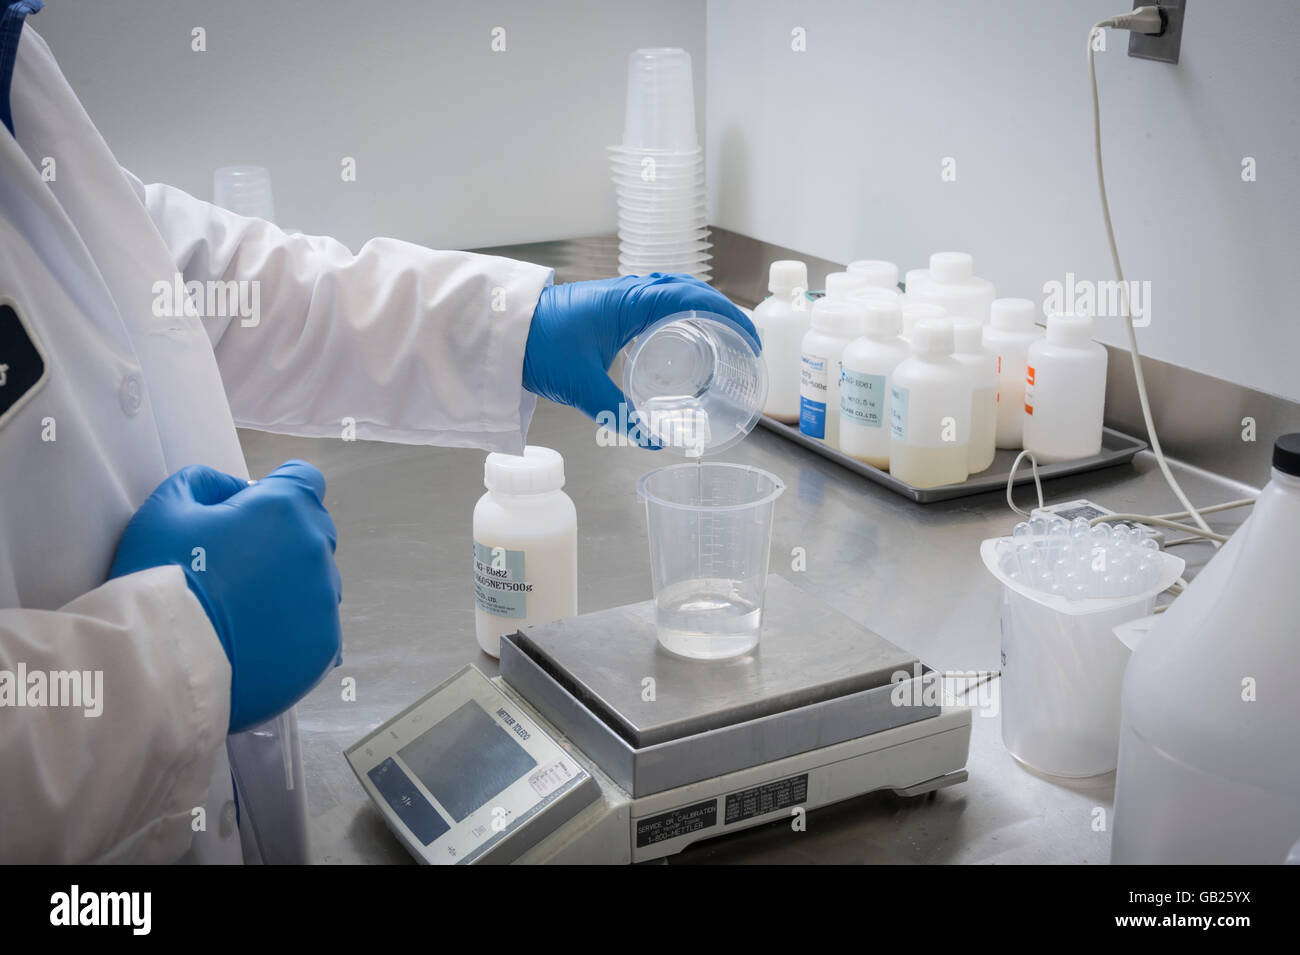 Lab Technician's Hands Pouring Chemicals In To Beaker For Weighing Measurement Stock Photo